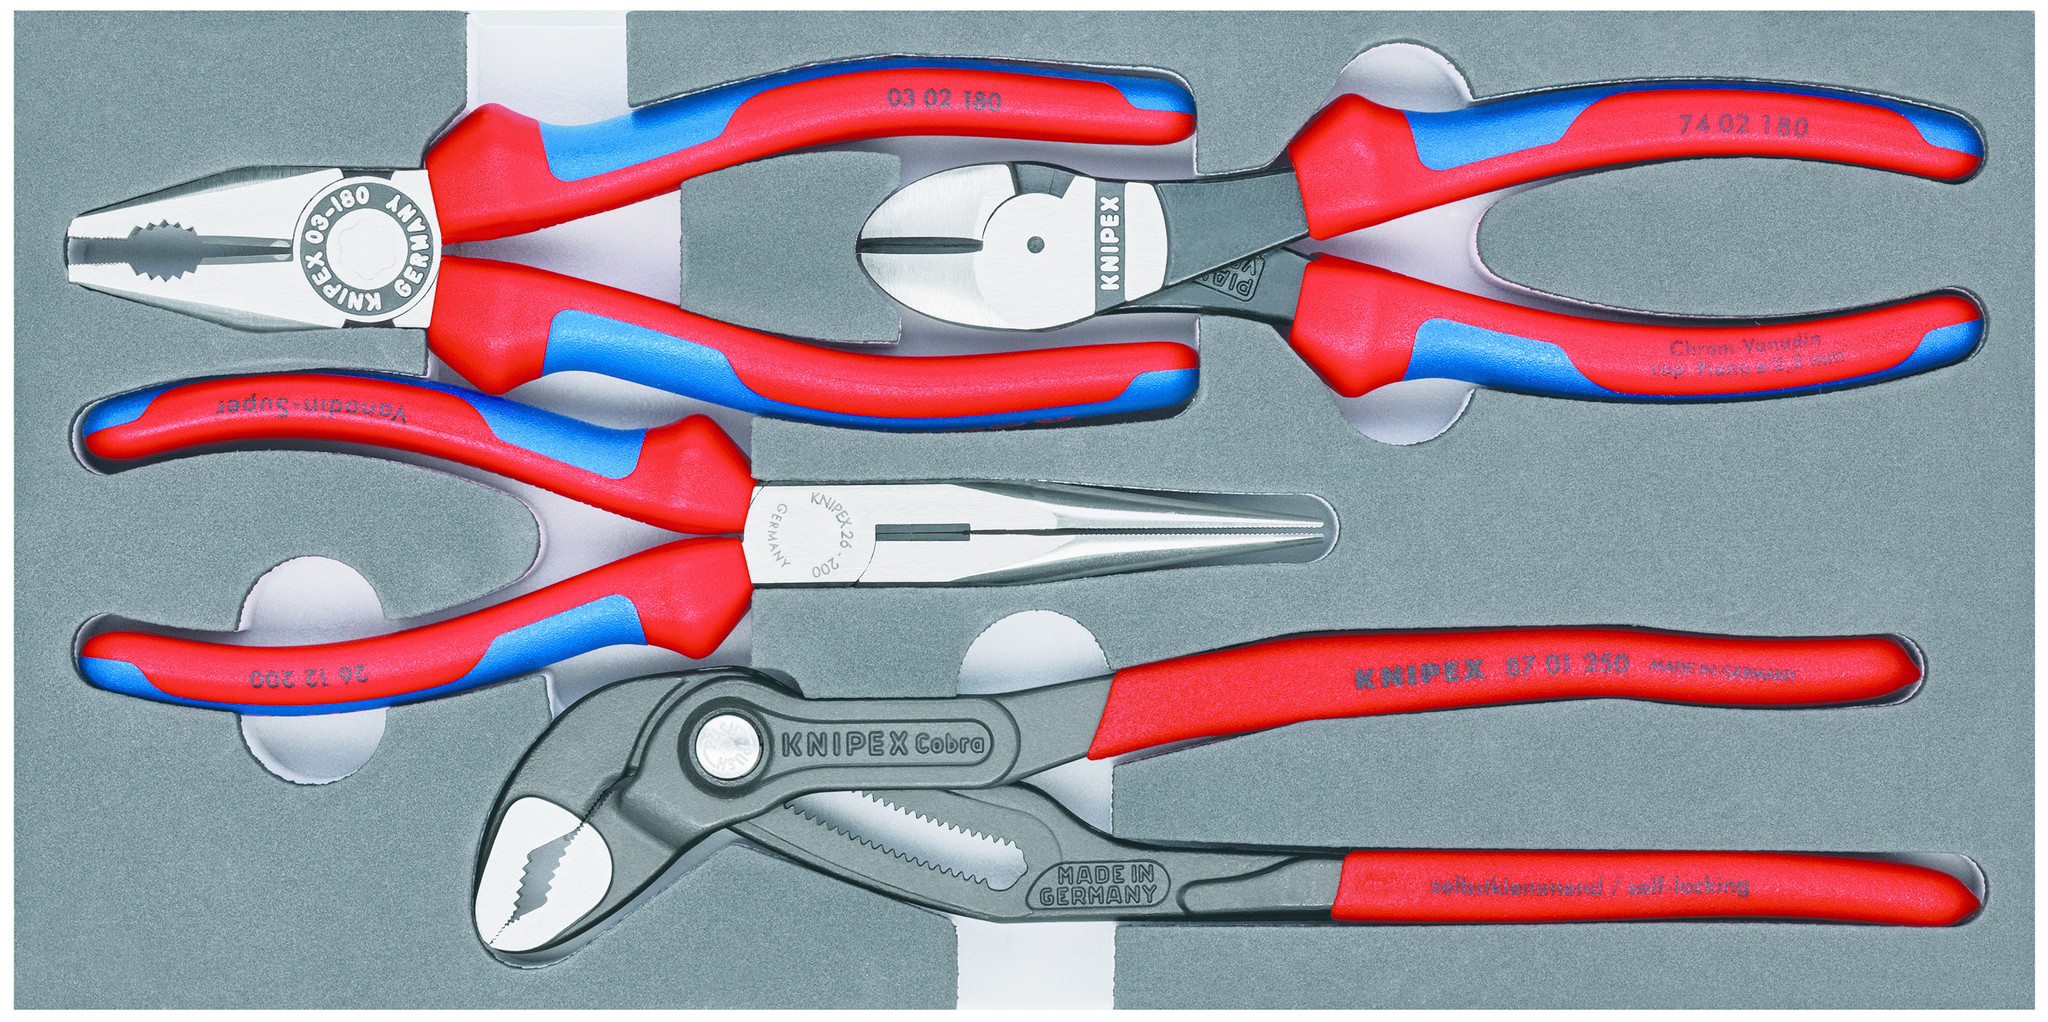 4-delige professionele tangenset KNIPEX 00 20 V15 - Cable-Engineer.nl